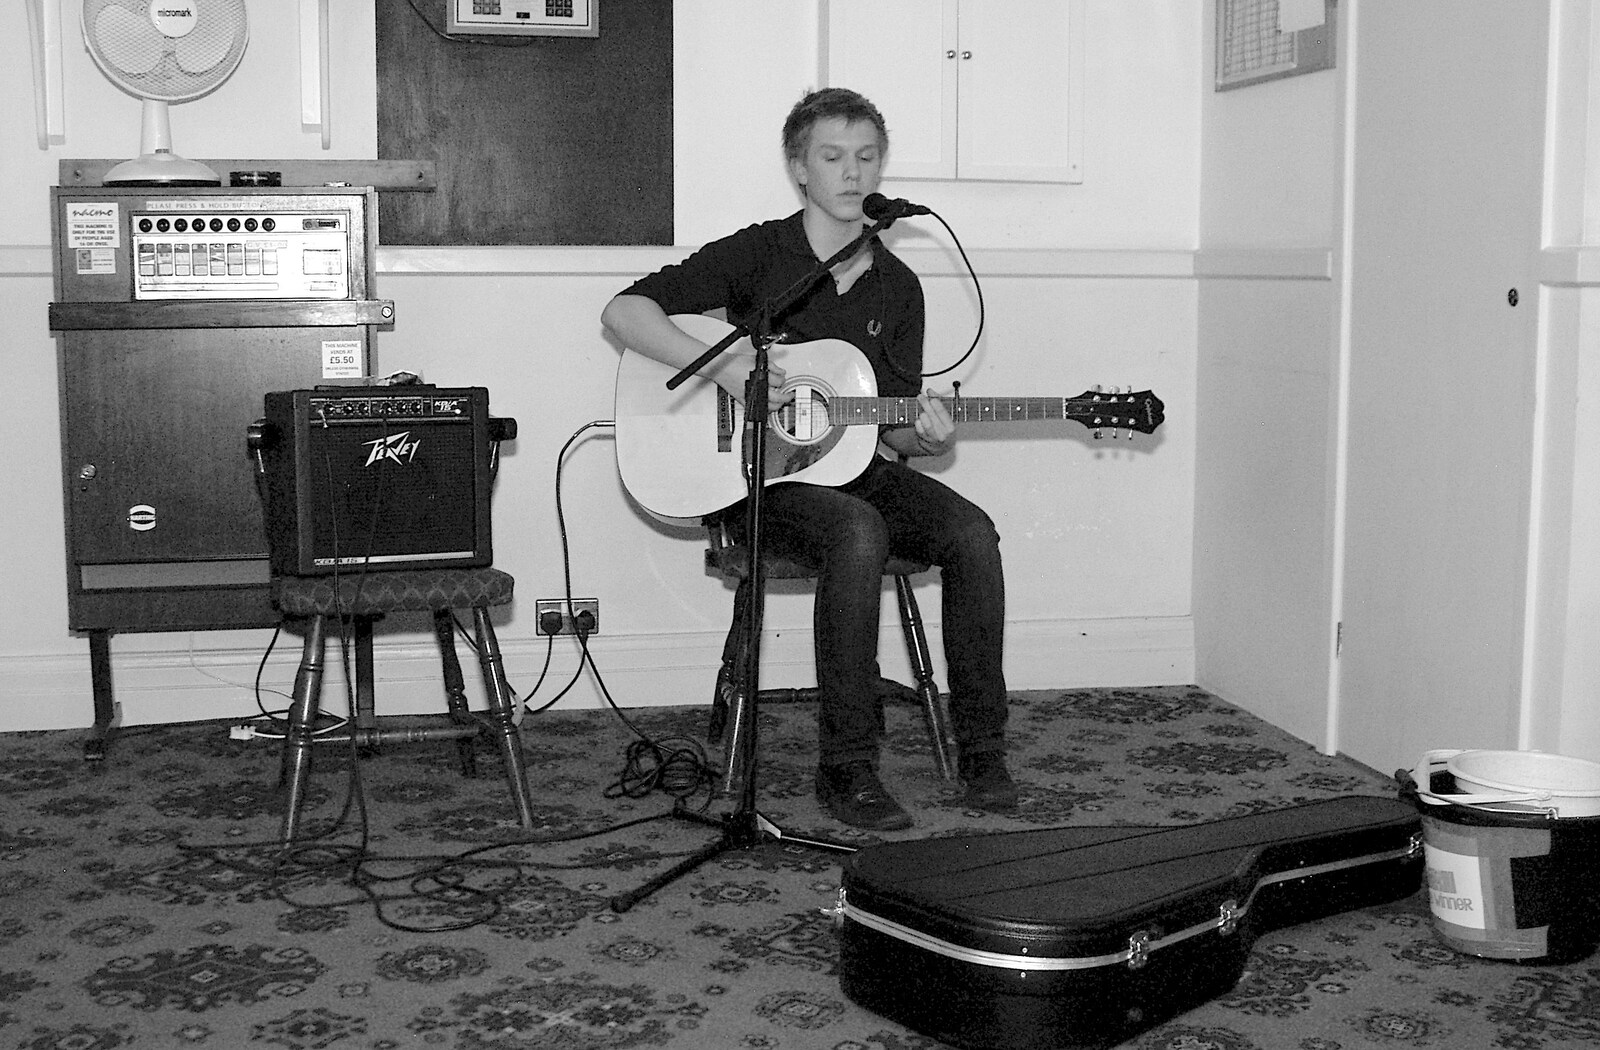 Rory in the Redgrave Cross Keys from Rory Hill's "Tour in a Night", Norfolk and Suffolk - 17th November 2006